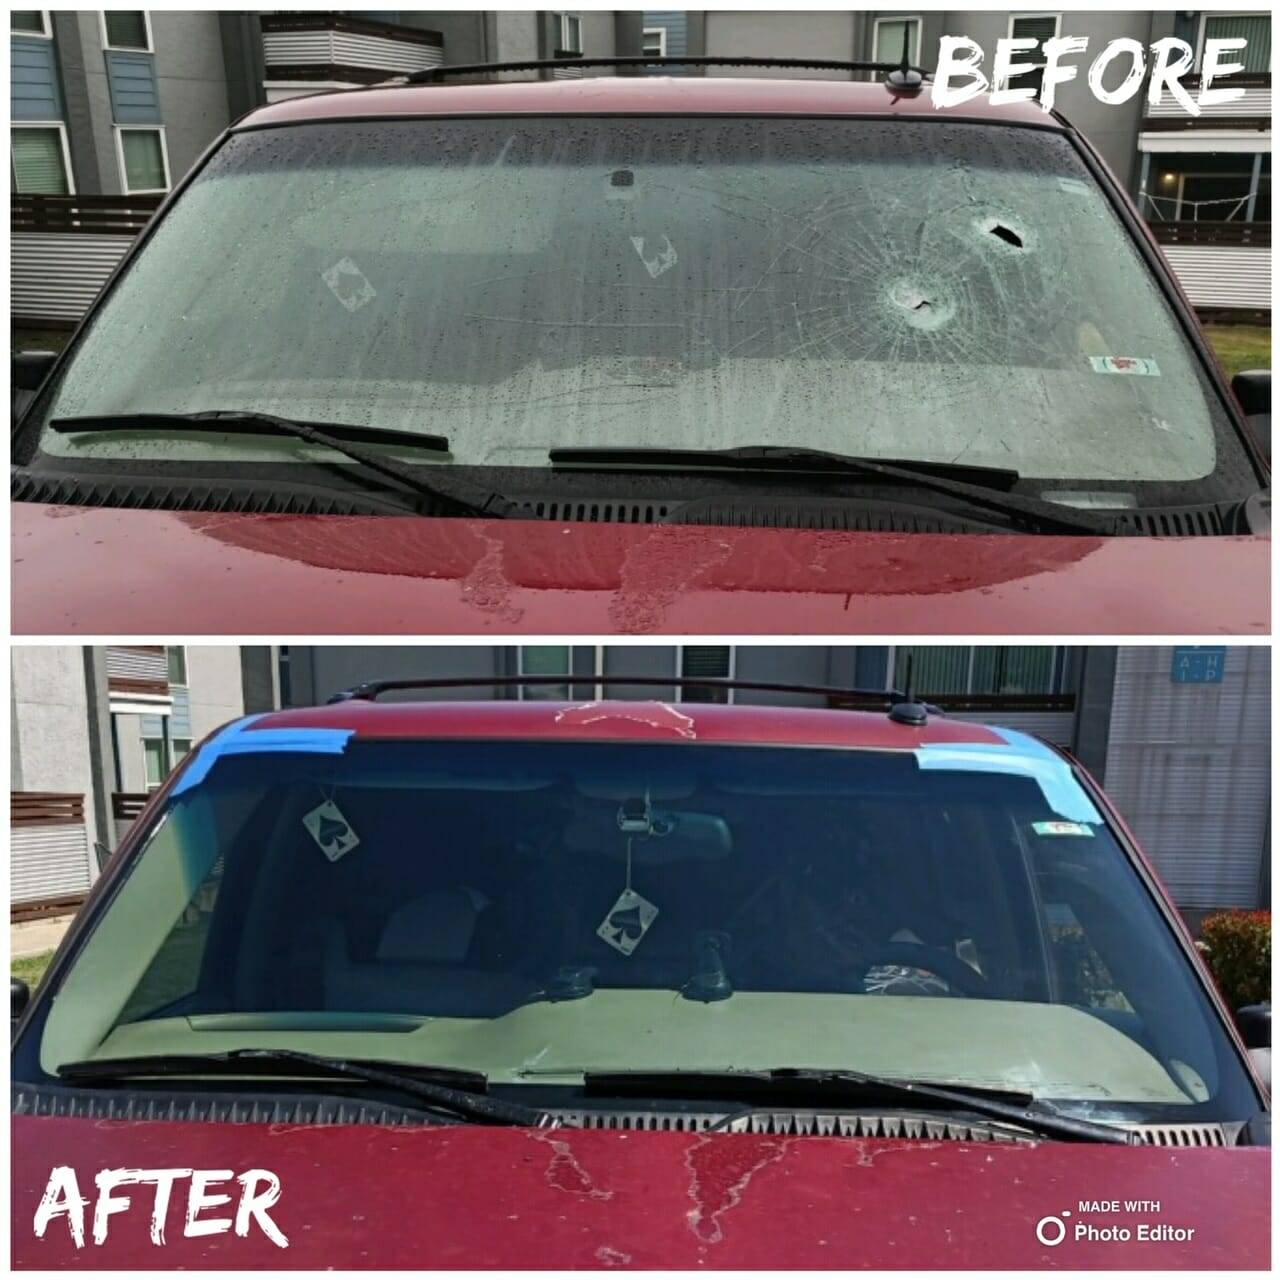 This split image showcases the repair process of a large SUV's front windshield during a home auto glass appointment at the AT&T Center in San Antonio, Texas. The top half of the image reveals the damaged windshield with several puncture holes from vandalism, while the bottom half displays the skillfully replaced 1-piece stationary factory privacy tinted windshield, restoring the vehicle to its original condition.